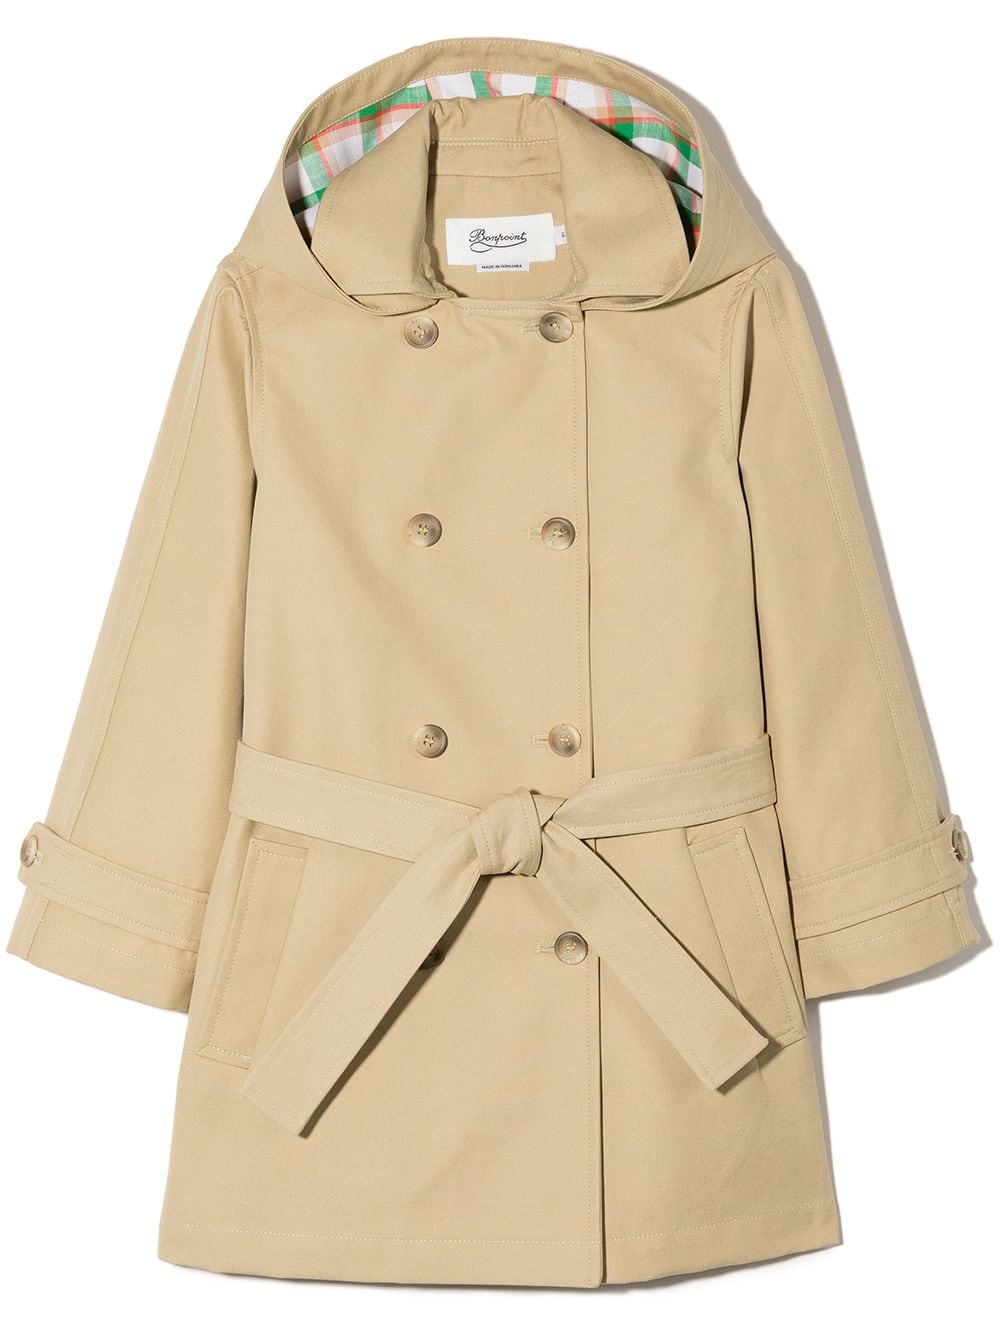 Bonpoint double-breasted hooded trench coat - Neutrals von Bonpoint